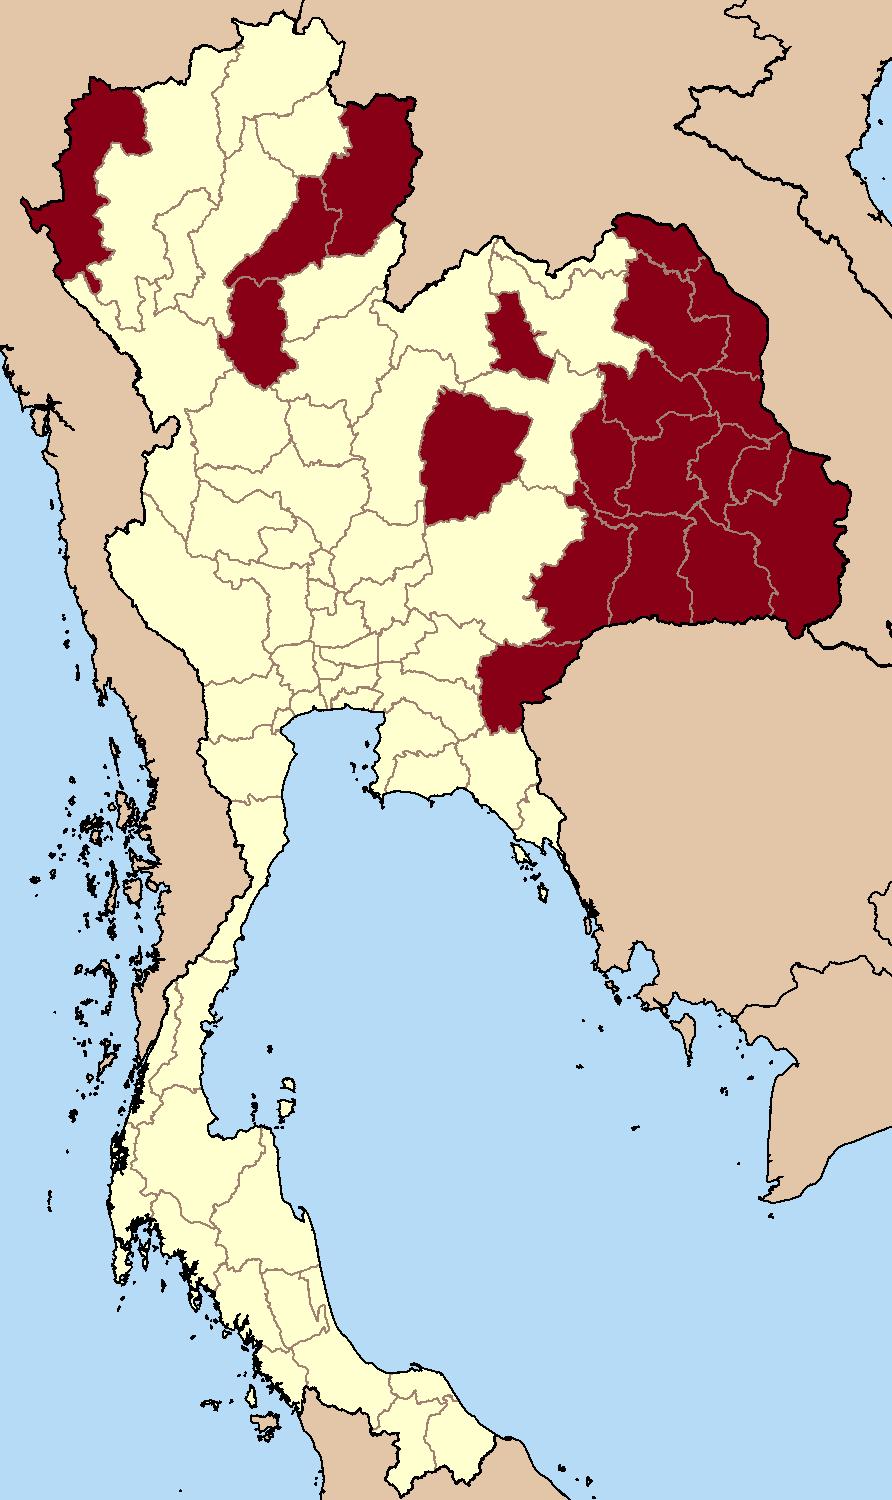 Merit on Decentralization 3 more years of corporate income tax exemption if located in the 20 poorest provinces (Kalasin, Chaiyaphum, Nakhon Phanom, Nan, Bueng Kan, Buri